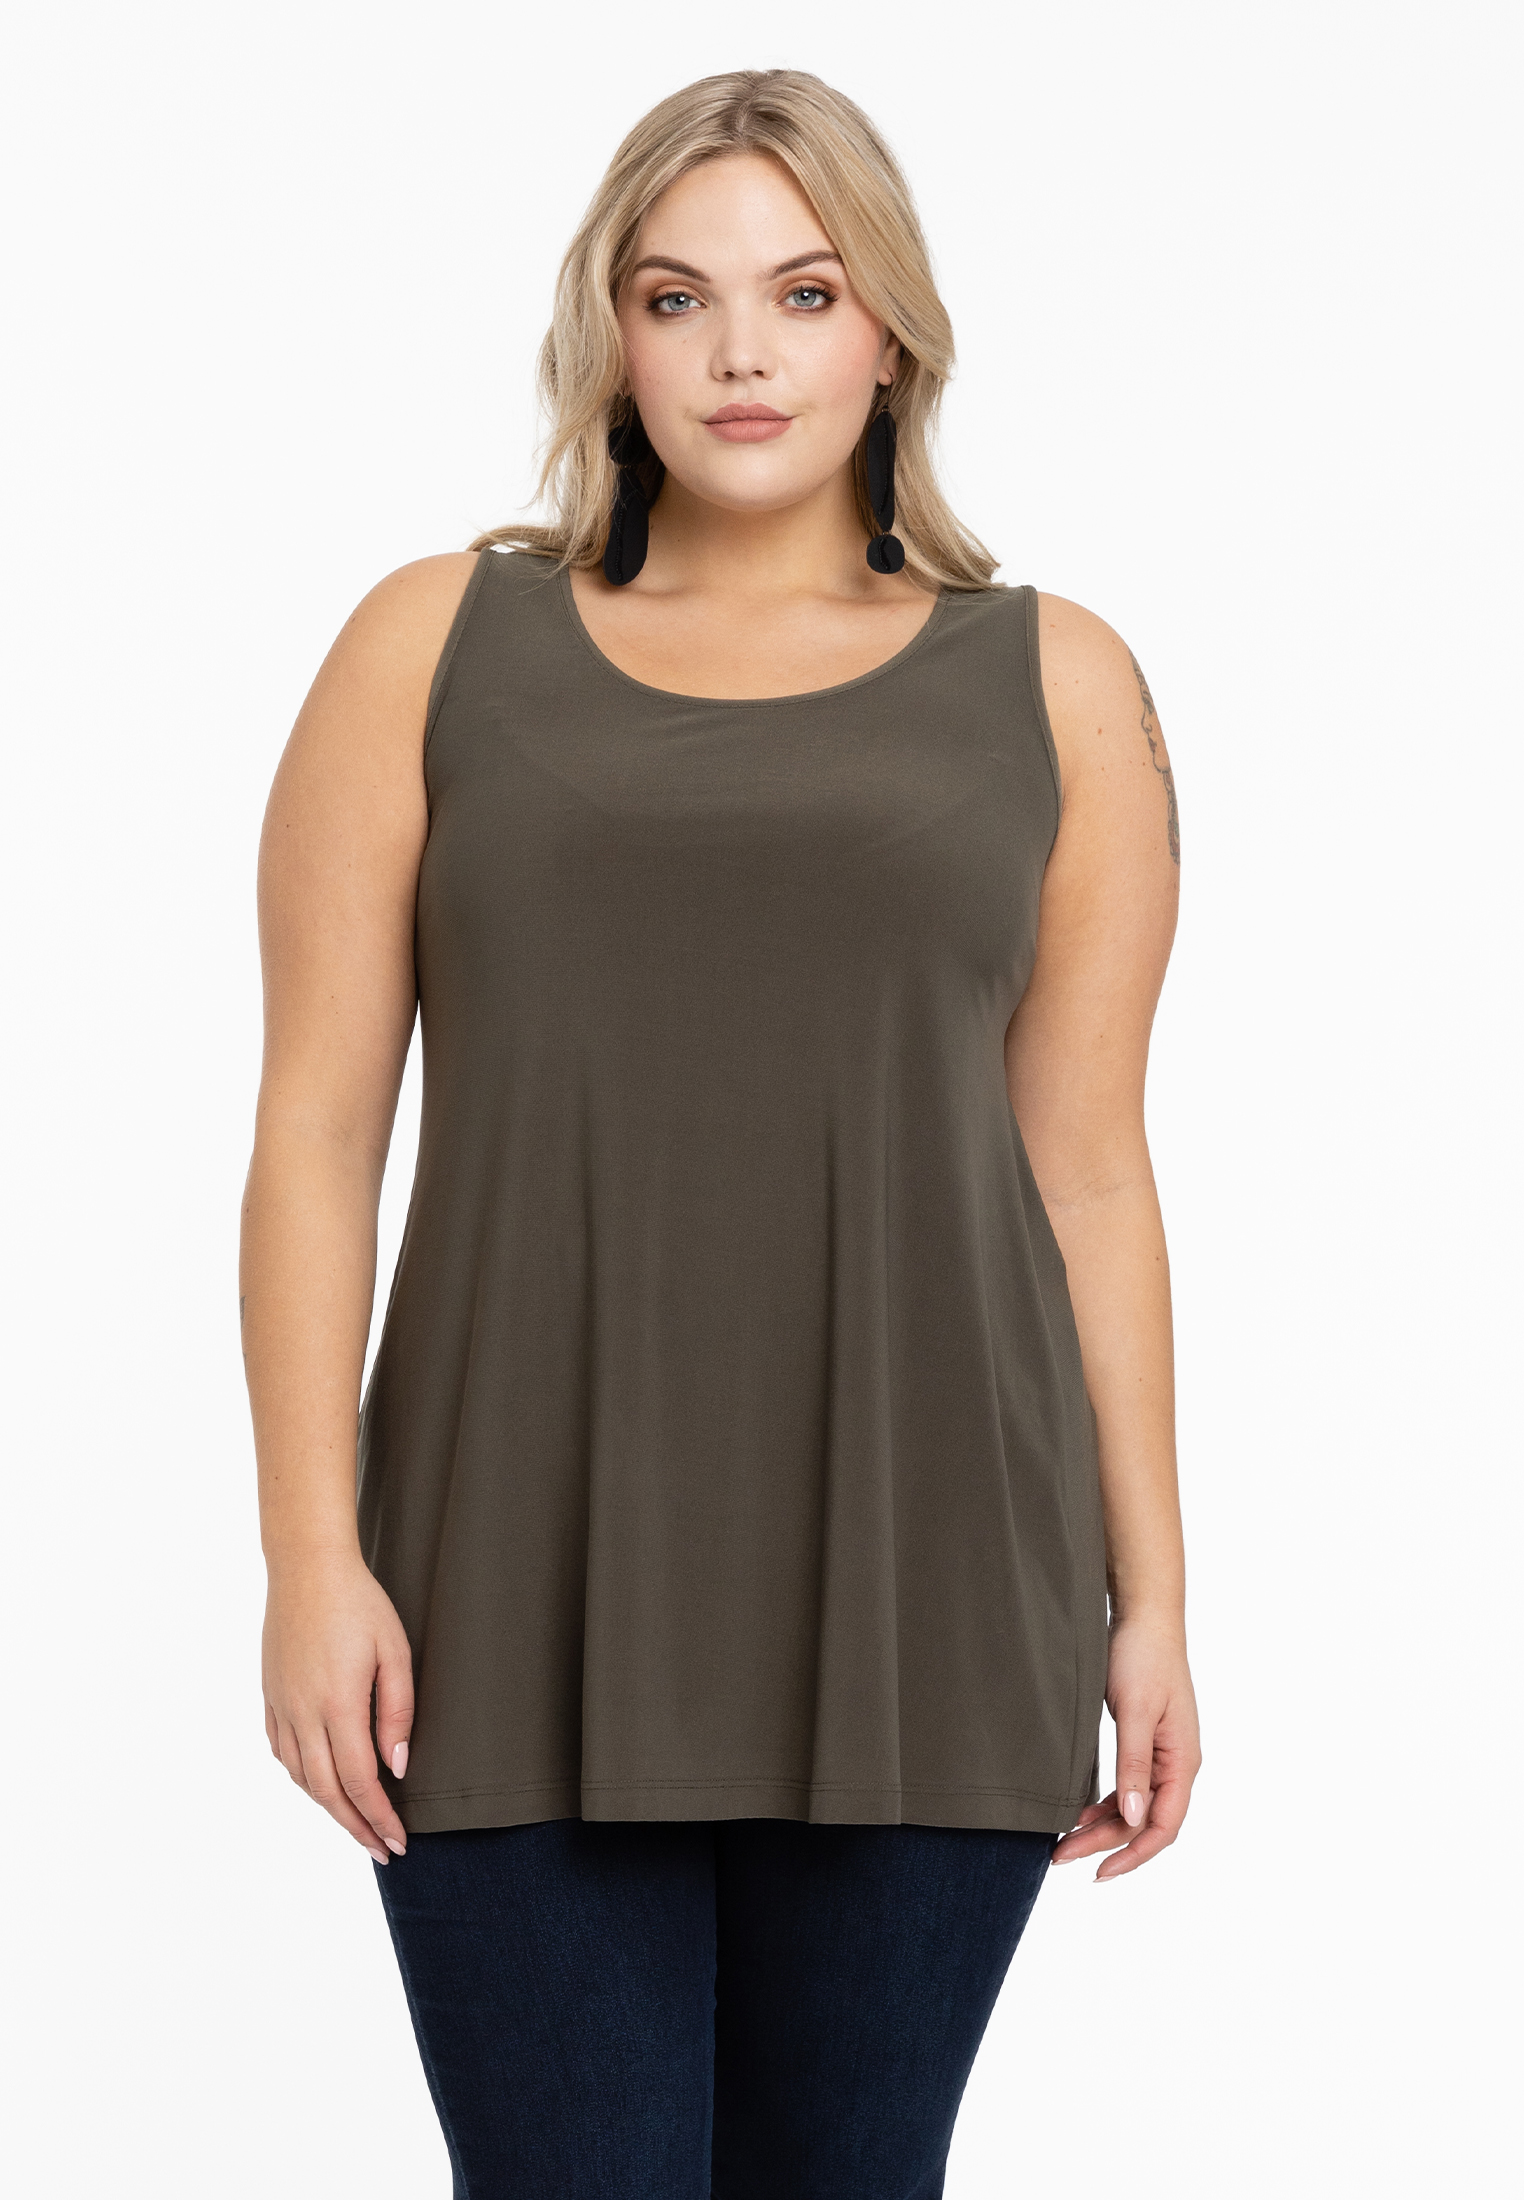 Top flare DOLCE 42/44 light green